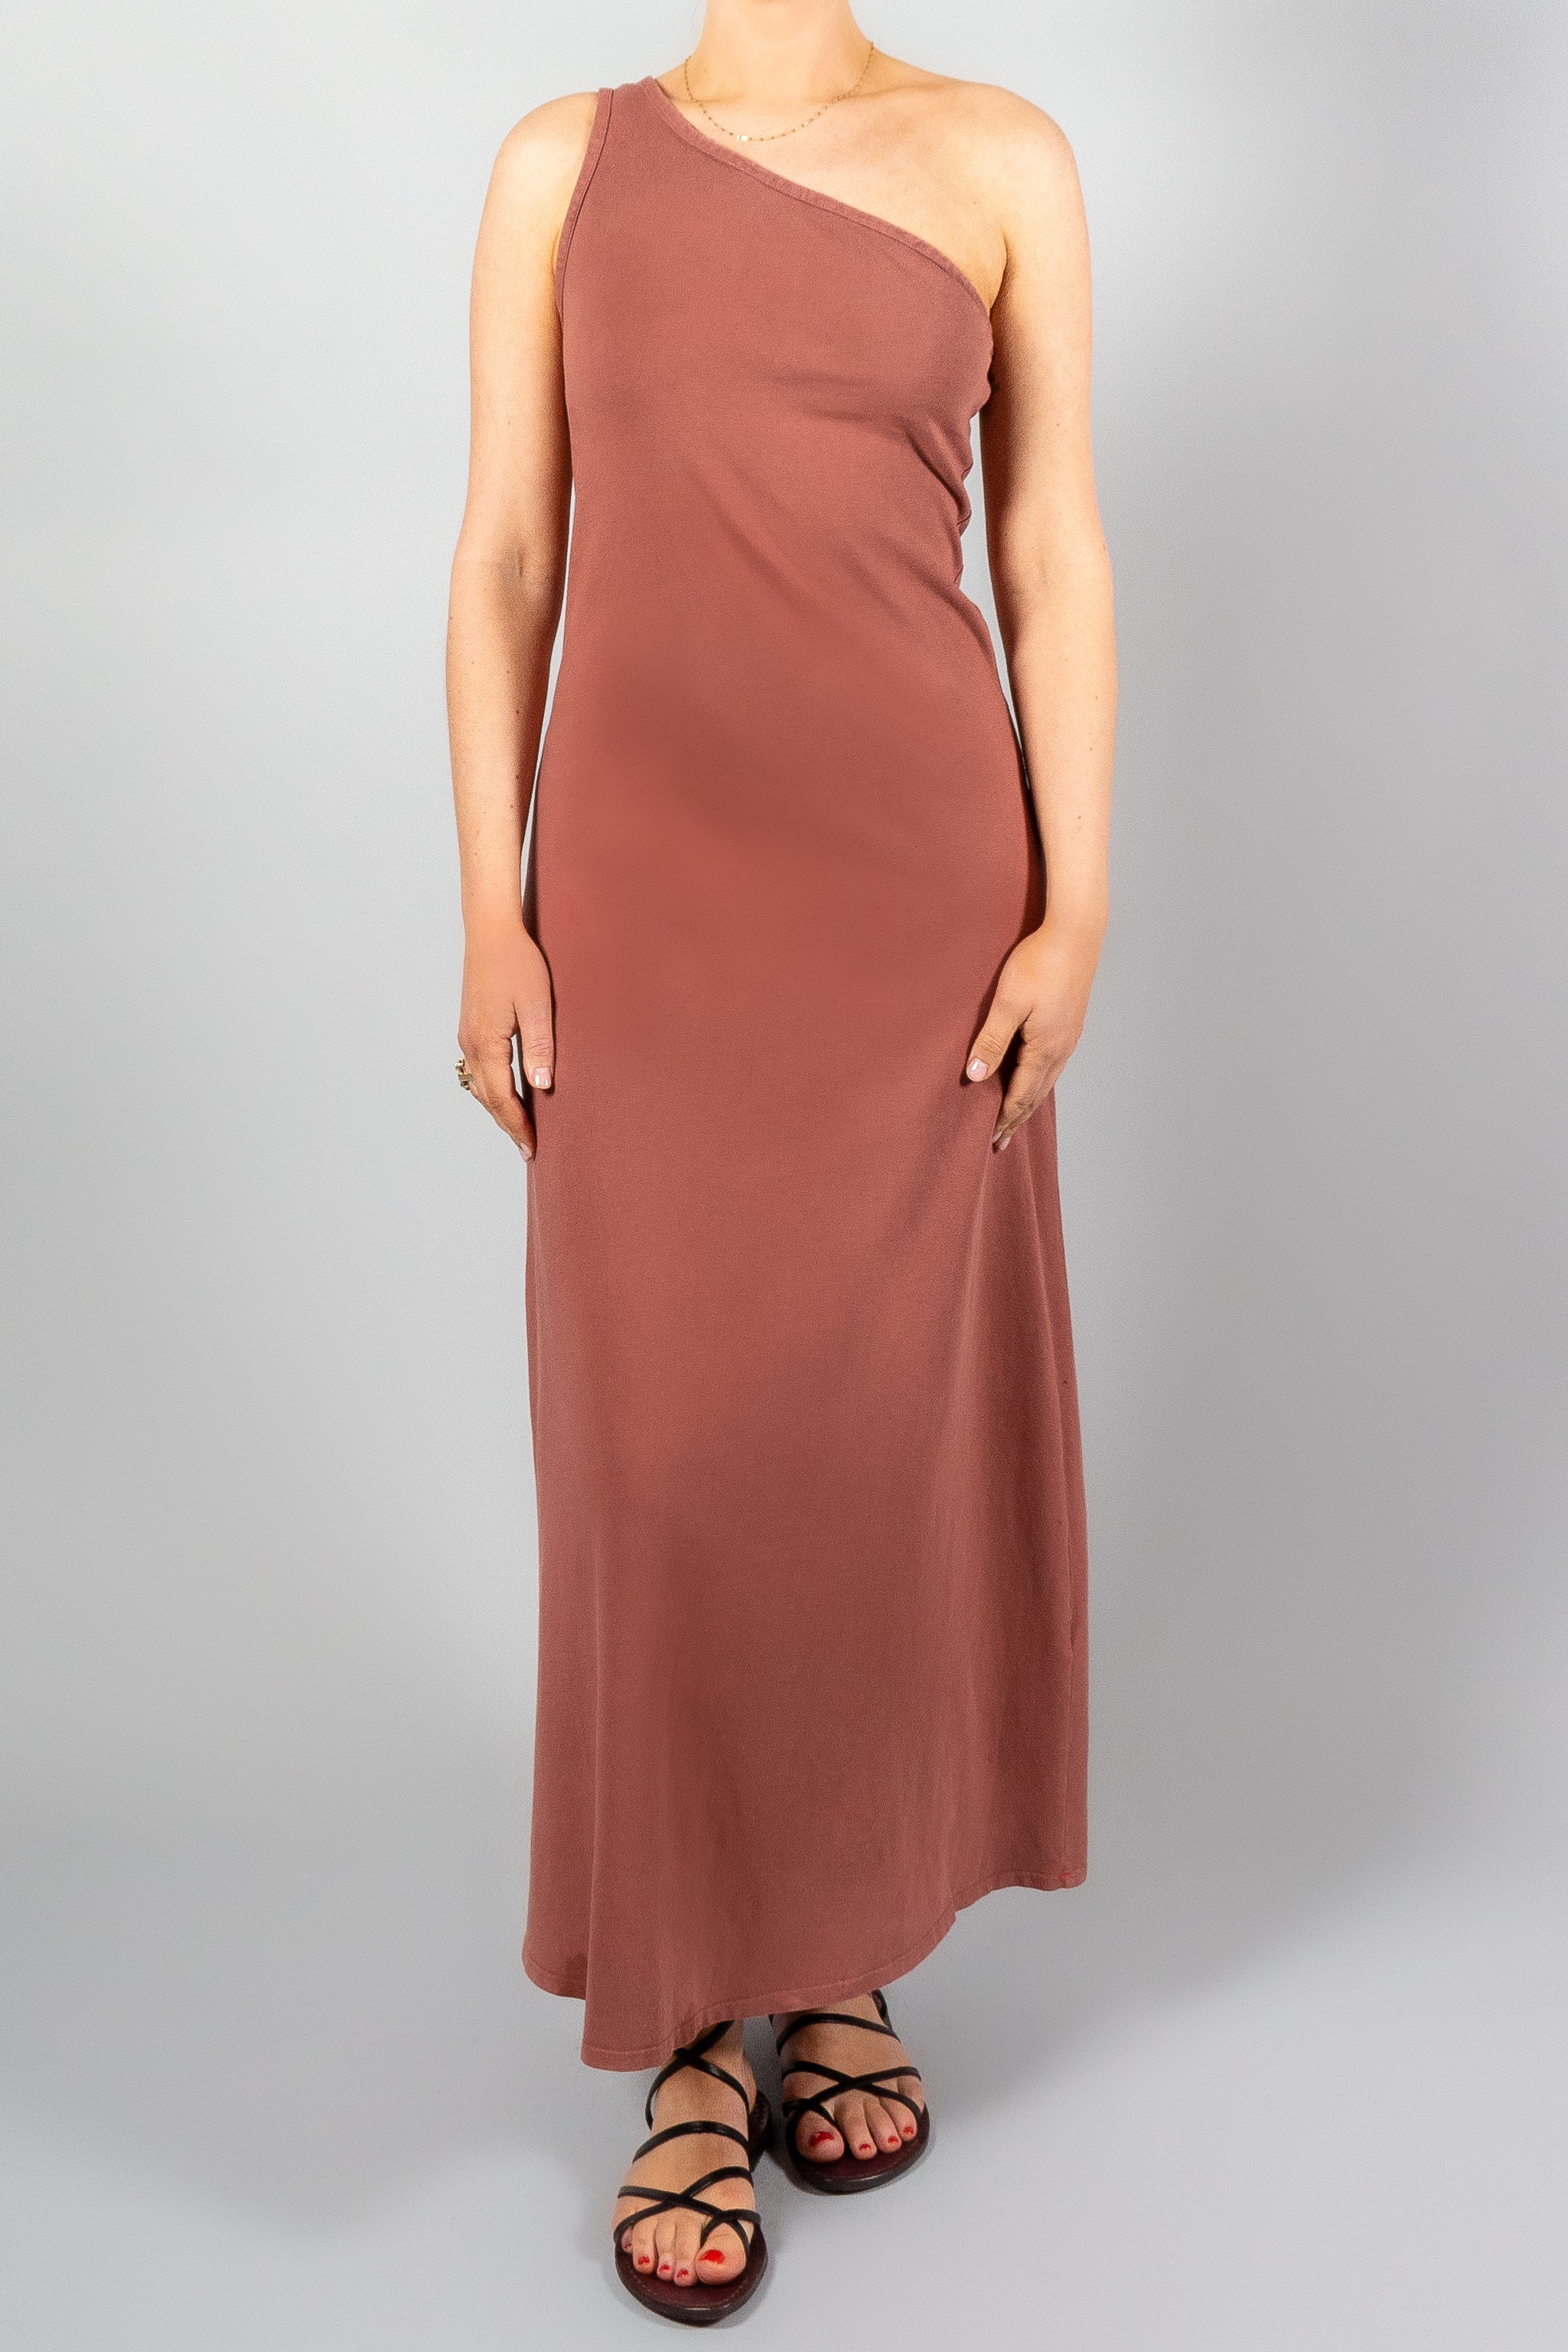 Xirena Genevieve Dress-Dresses and Jumpsuits-Misch-Boutique-Vancouver-Canada-misch.ca